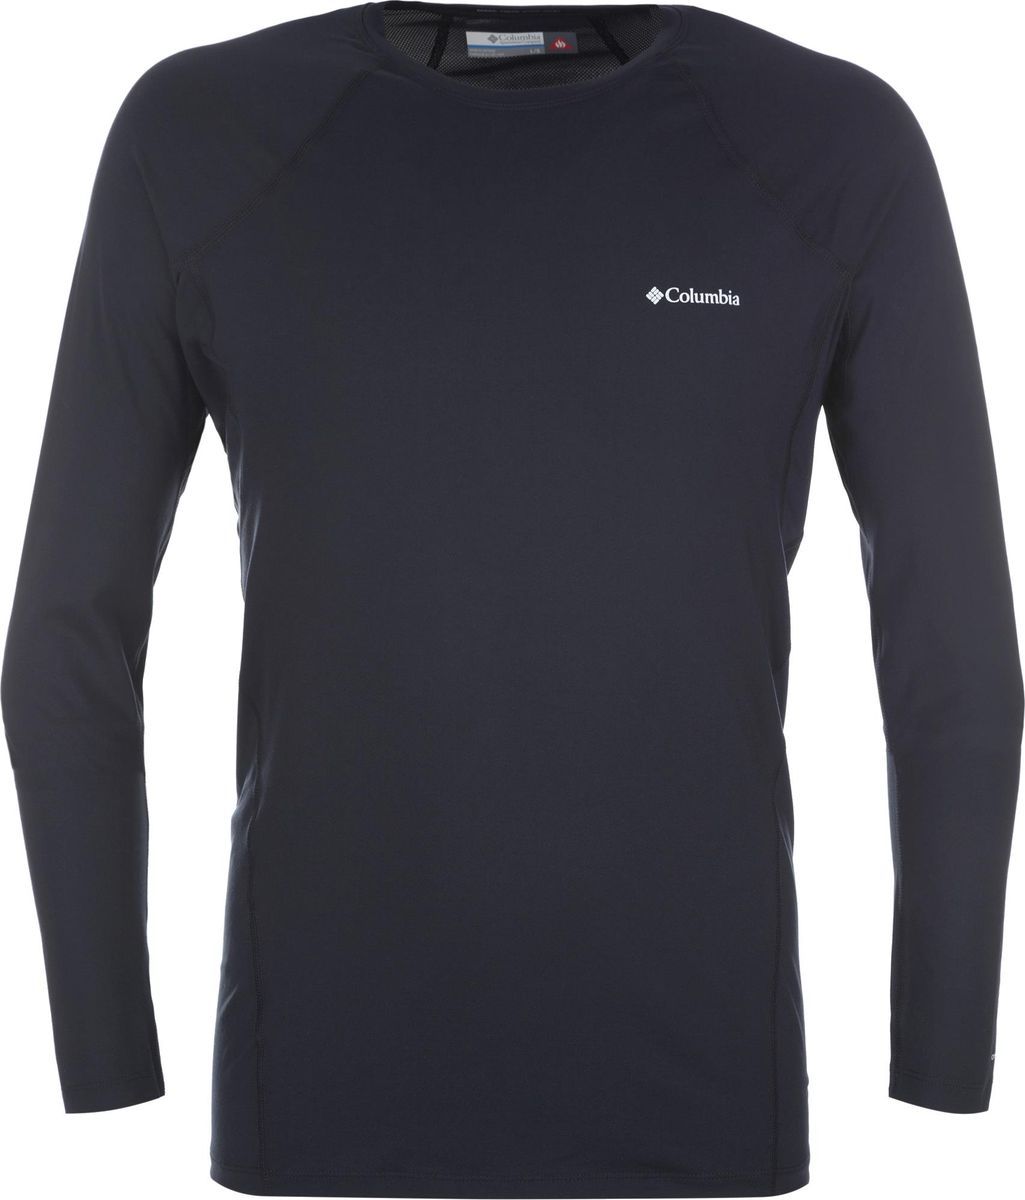   Columbia Midweight Stretch Long Sleeve Top, : . 1638591-010.  XXL (56/58)